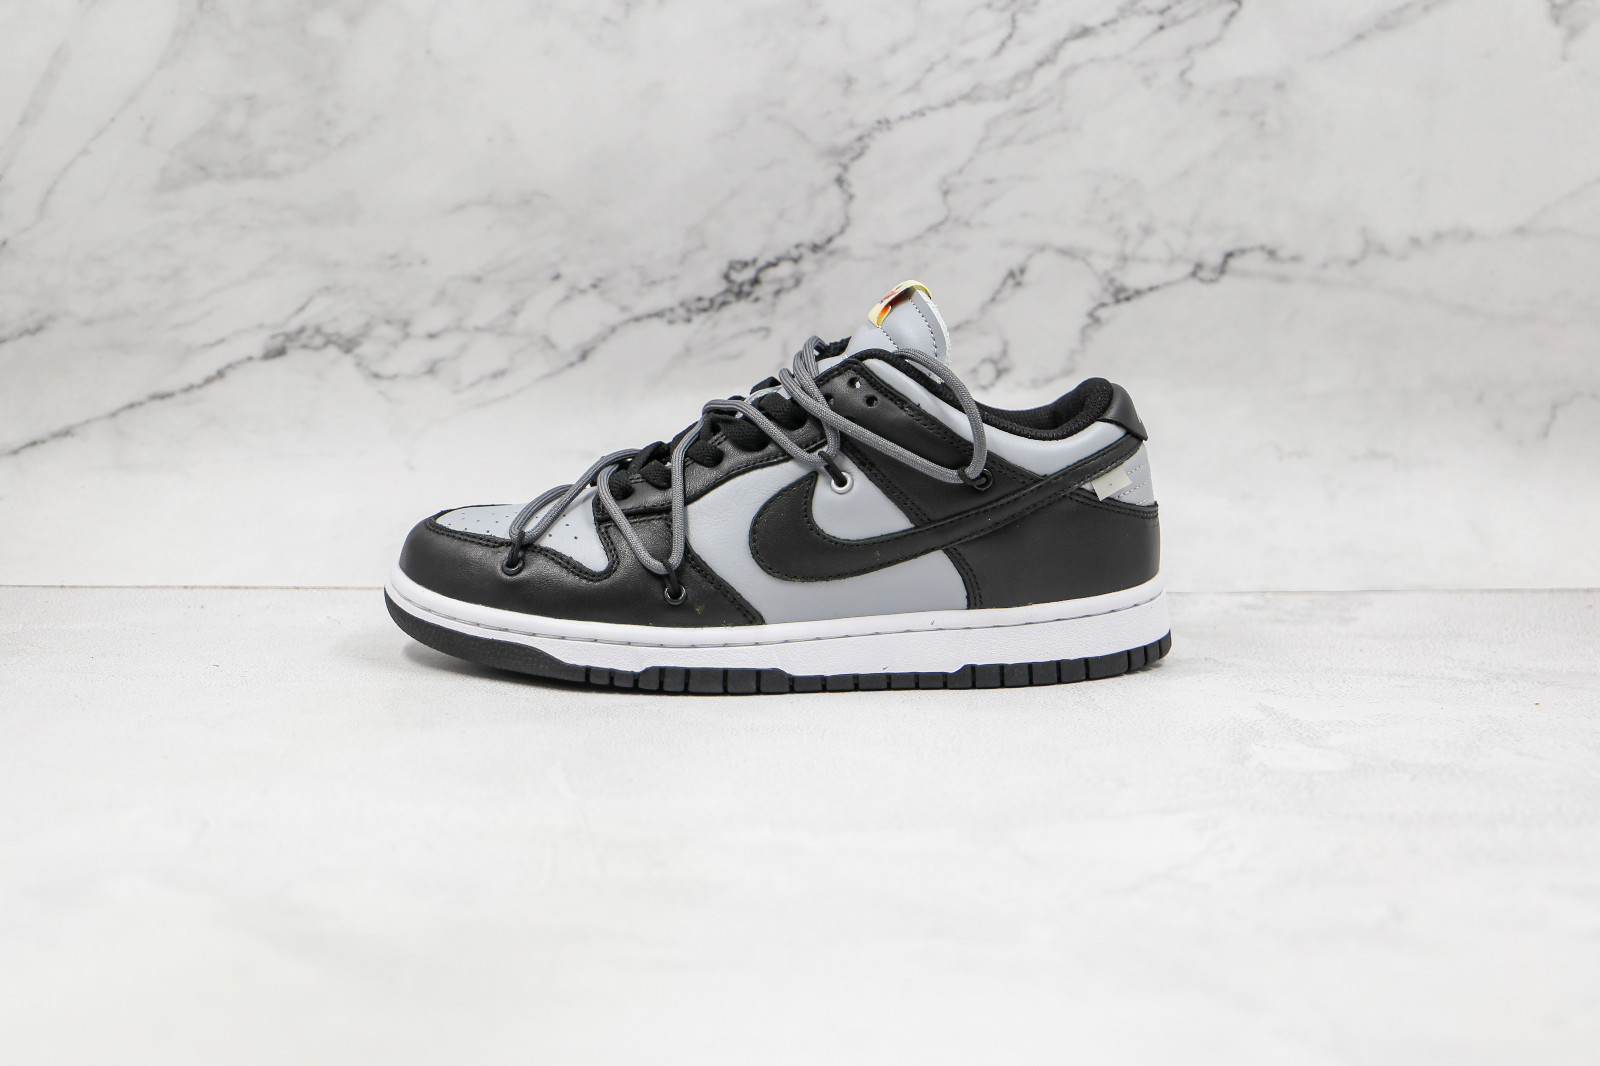 Ren og skær Tectonic Juster 007 - grey pink and black nike shoes sale girls - Off - White x Nike SB Dunk  Low Grey Black White CT0856 - MultiscaleconsultingShops